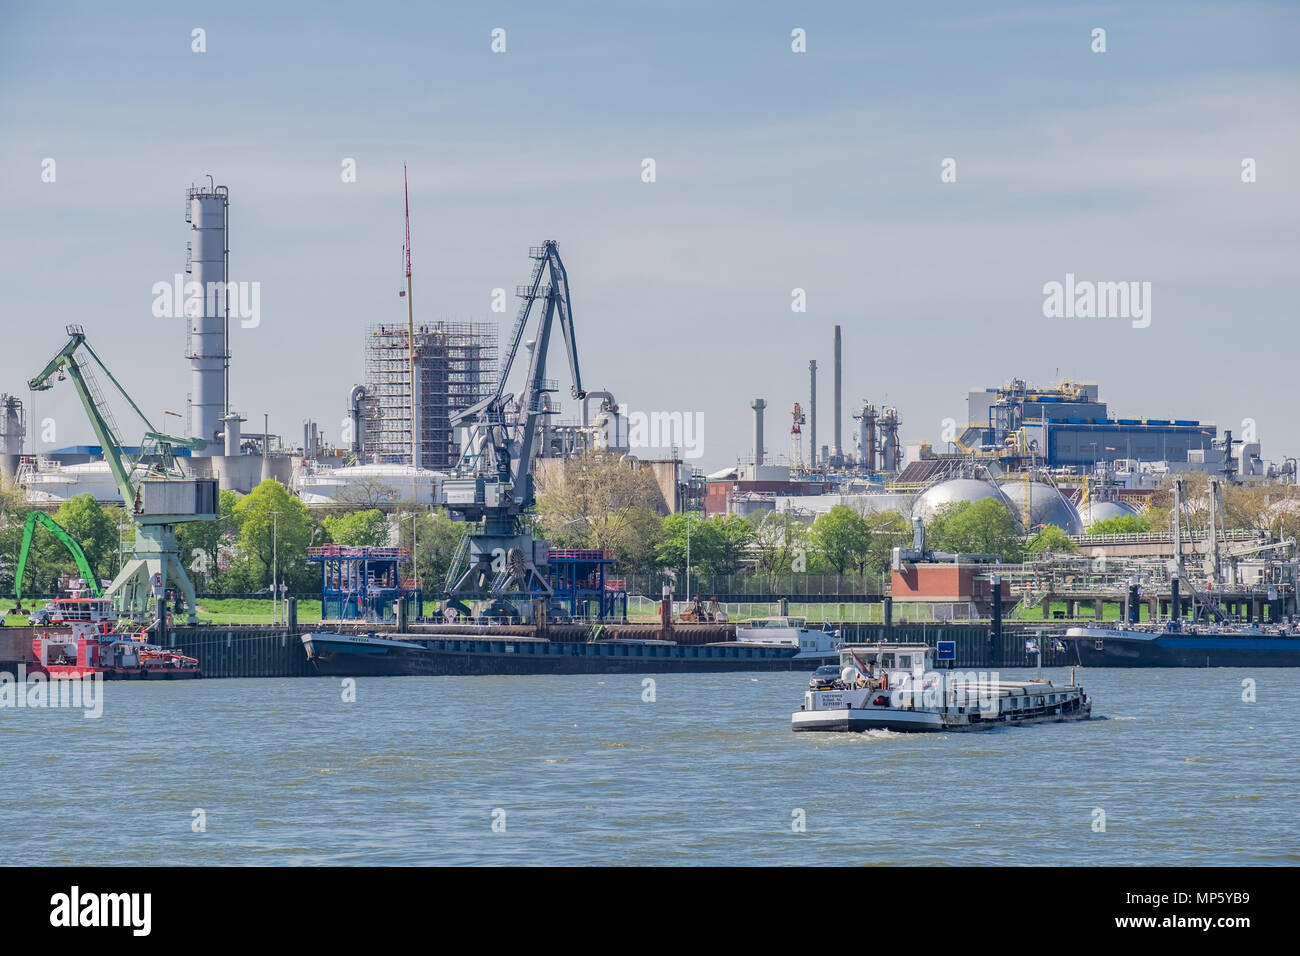 Large oil refinery on the Rhine River at the Port of Niehl. Stock Photo